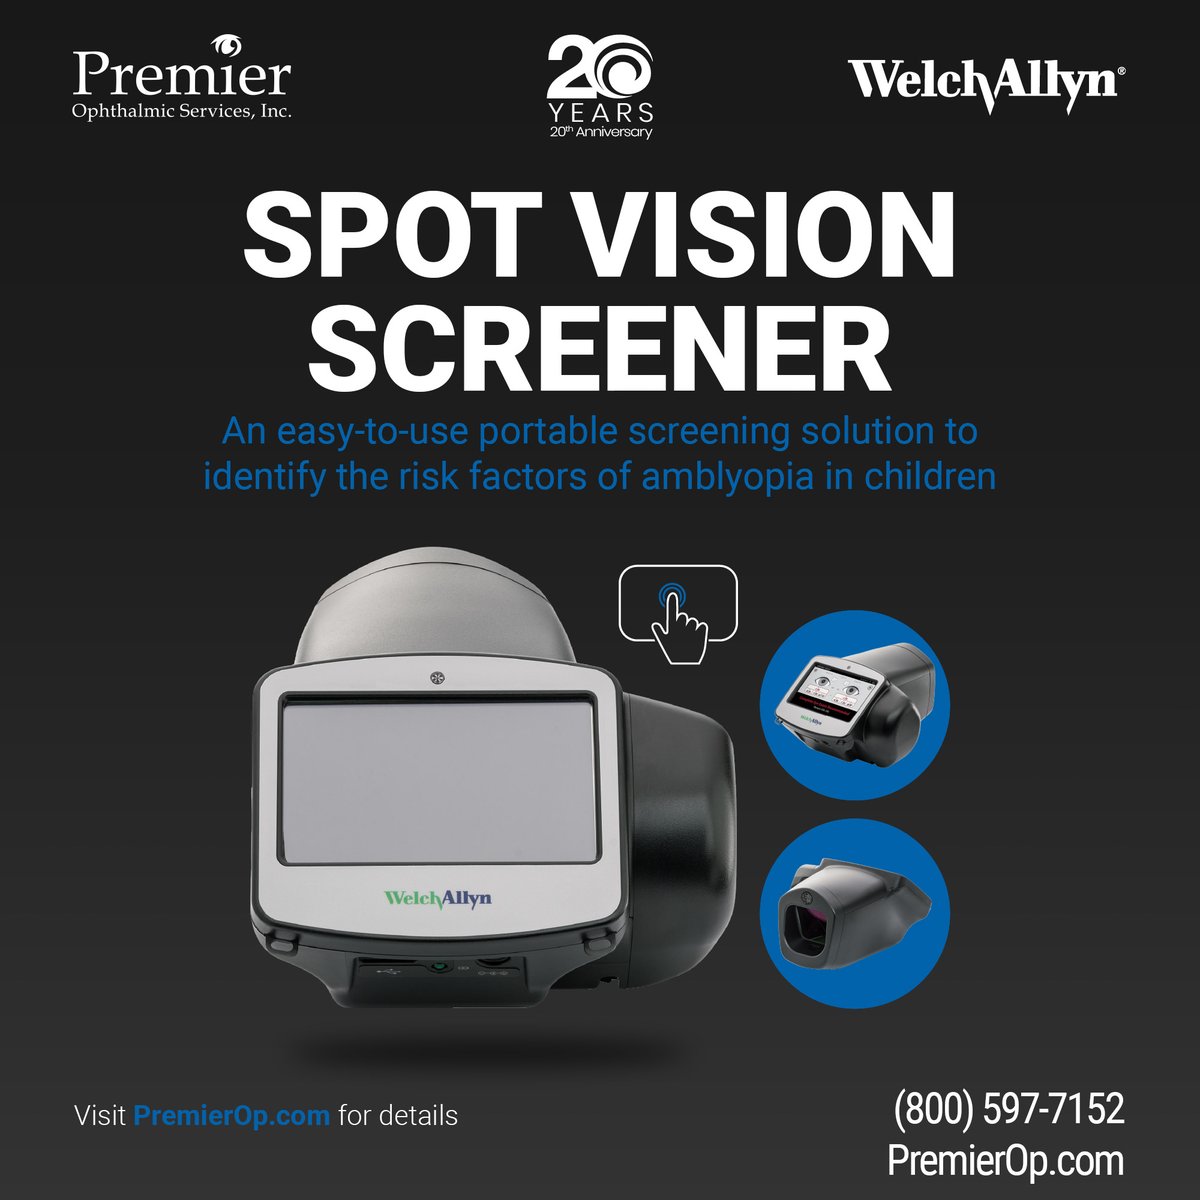 Welch Allyn Spot Vision Screener Conversion Chart